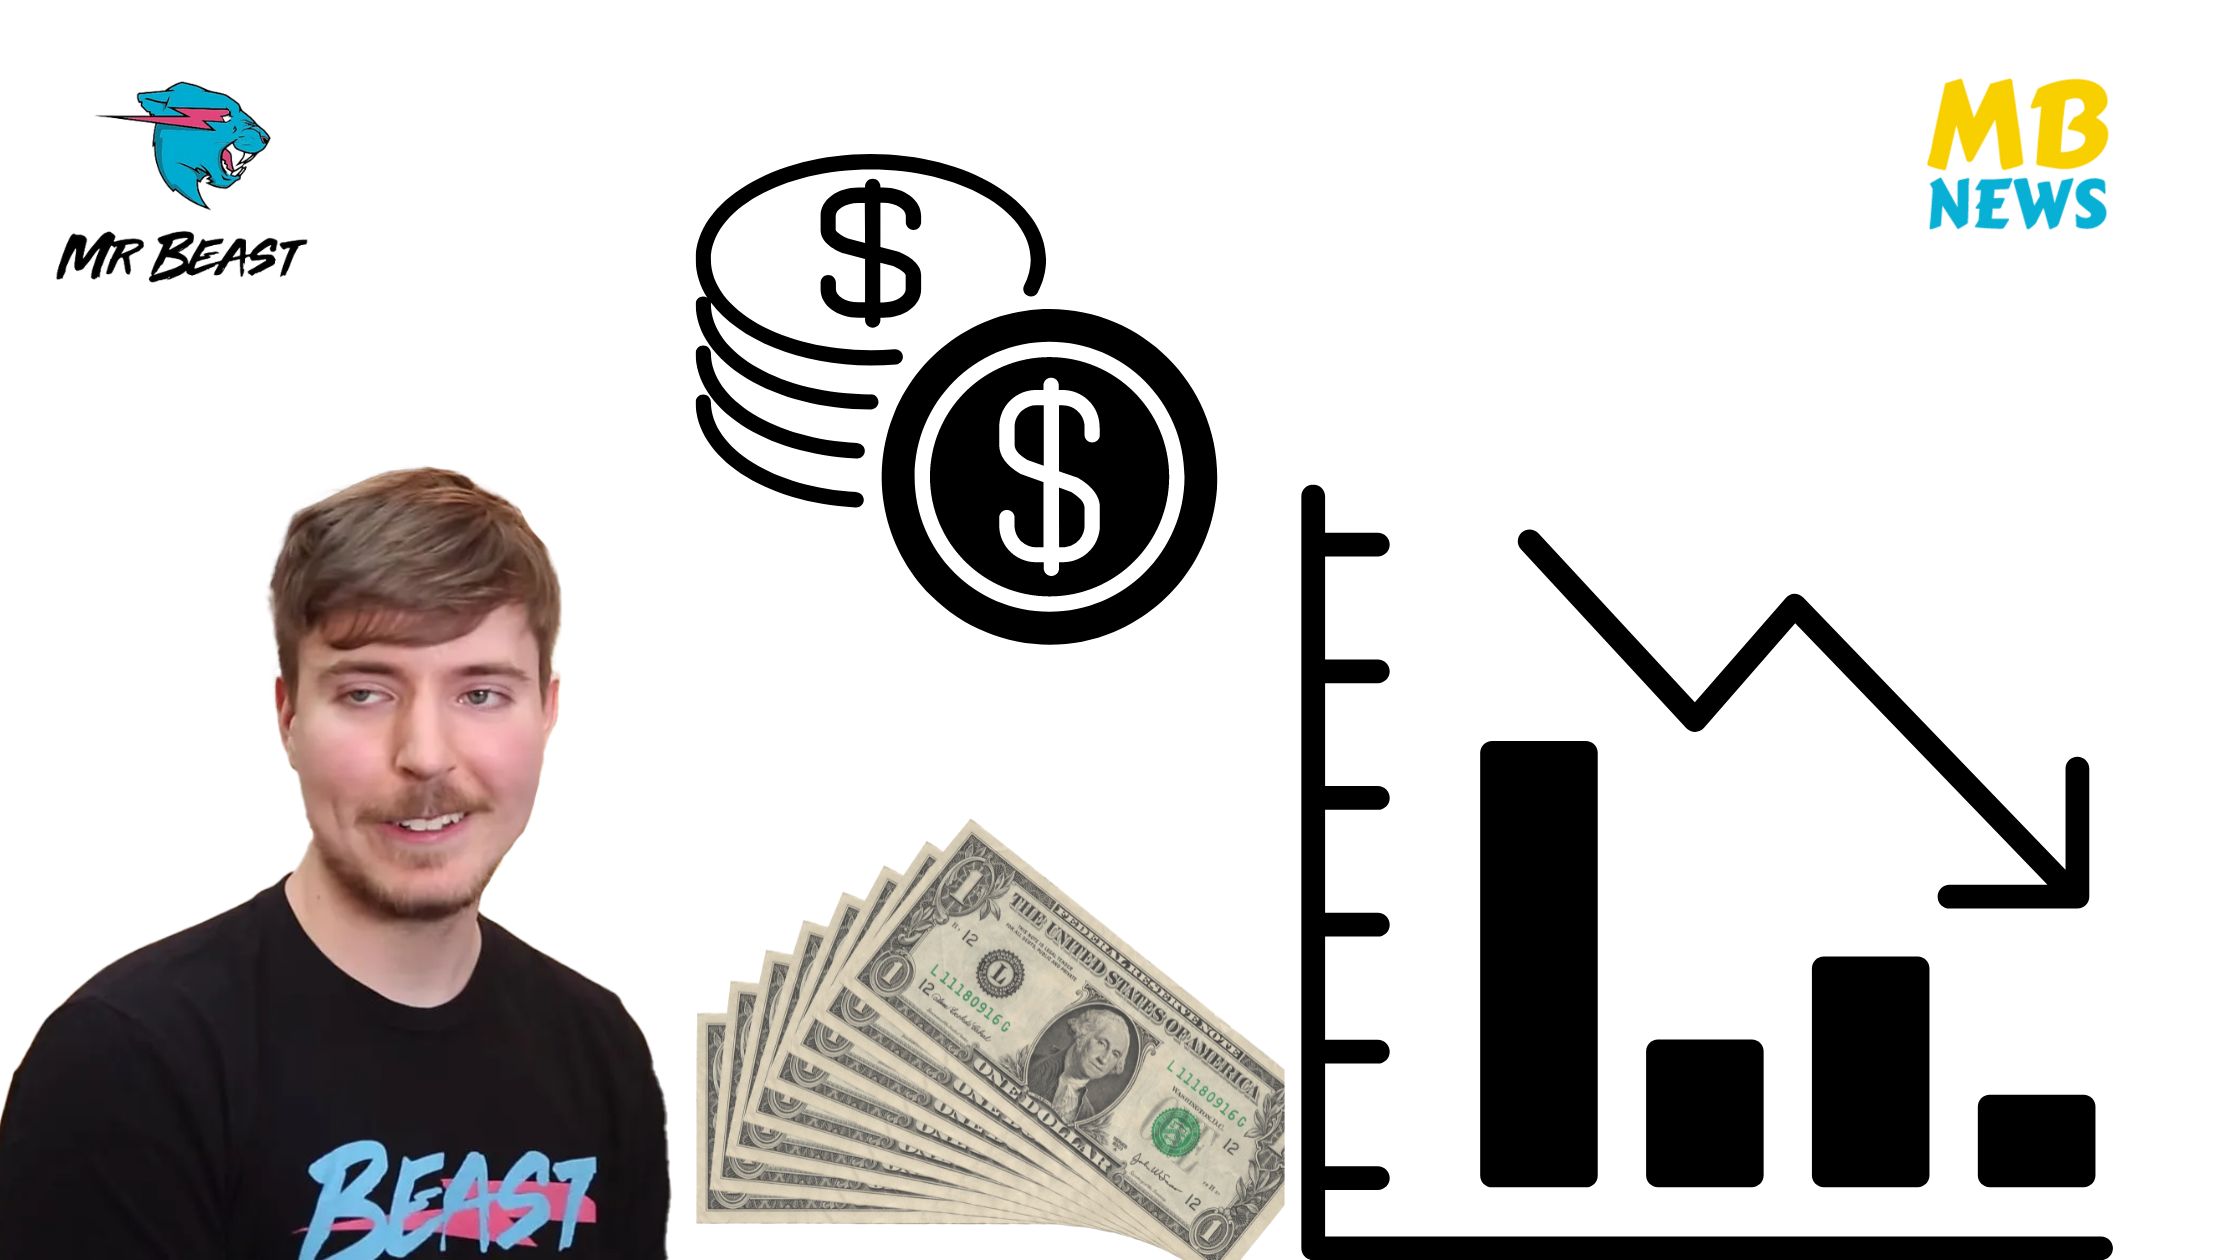 MrBeast Reveals Substantial Losses on Latest Video "Train Vs Giant Pit" While Disclosing YouTube Earnings!